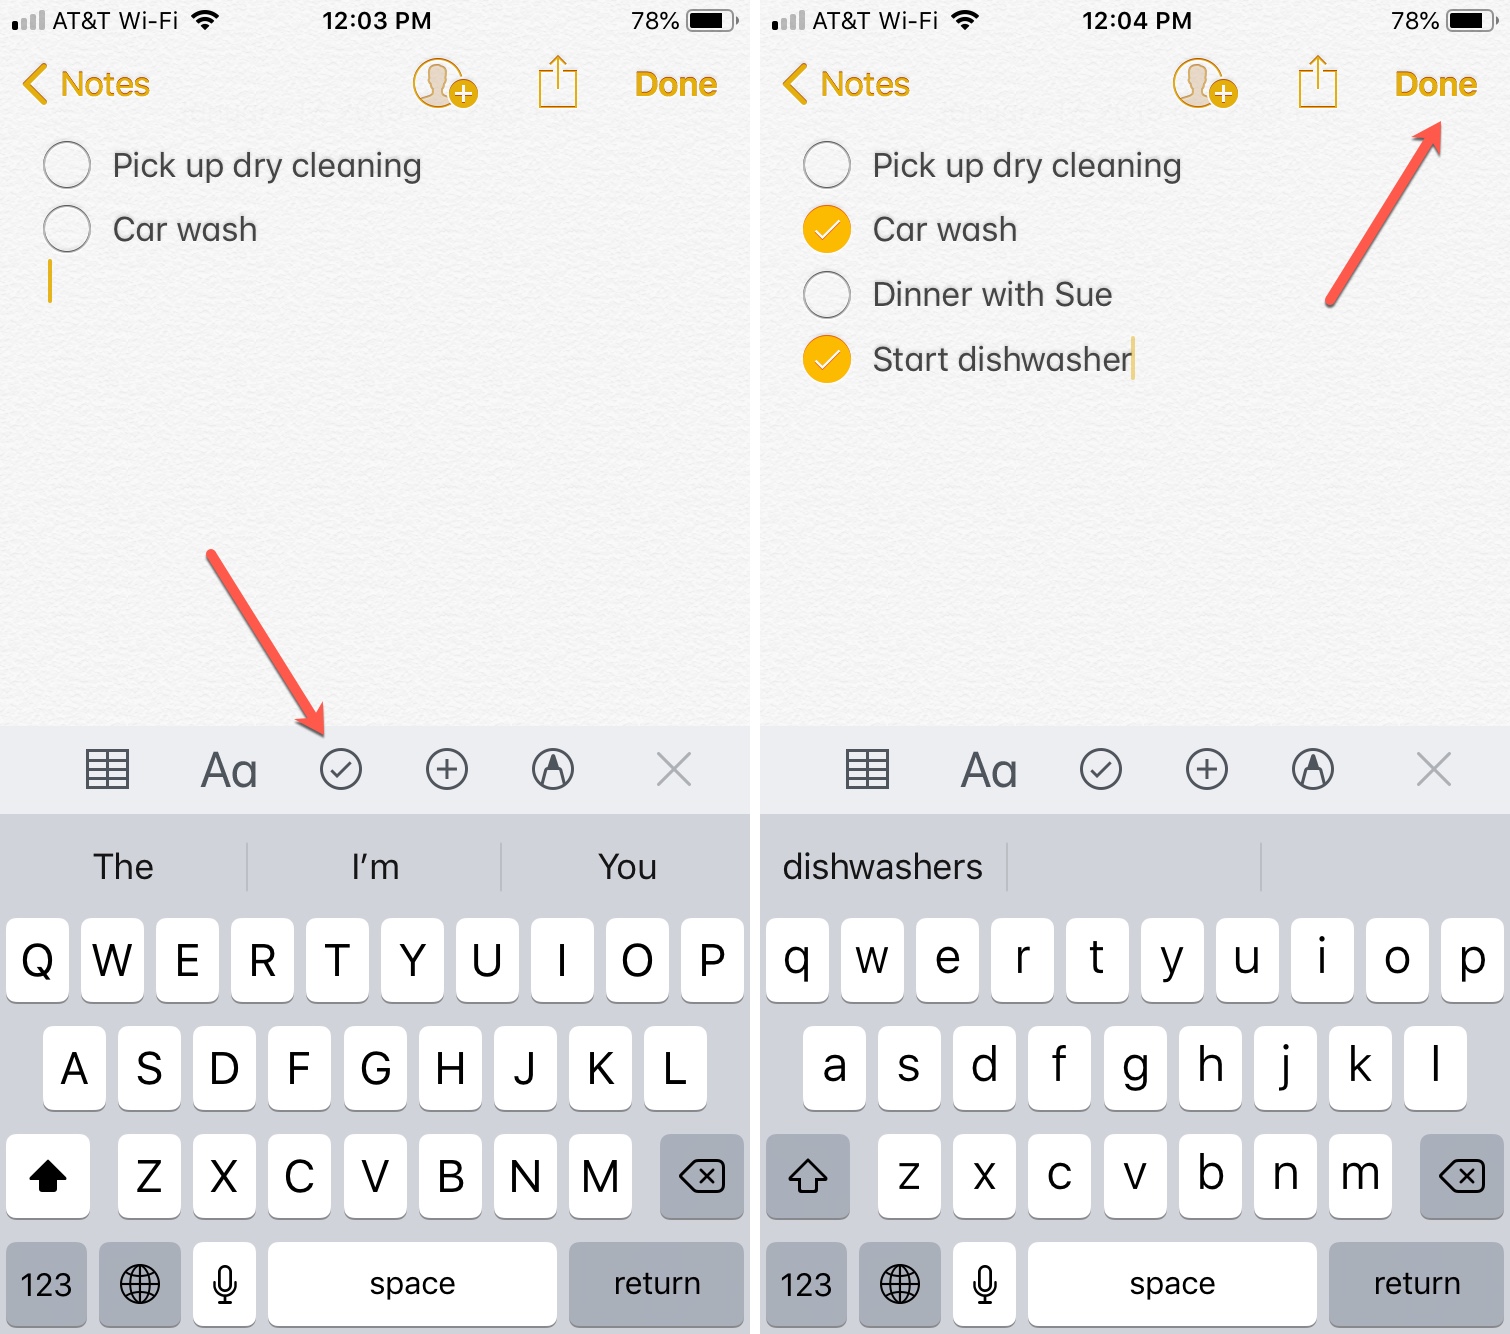 Notes Checklists on iPhone Updated